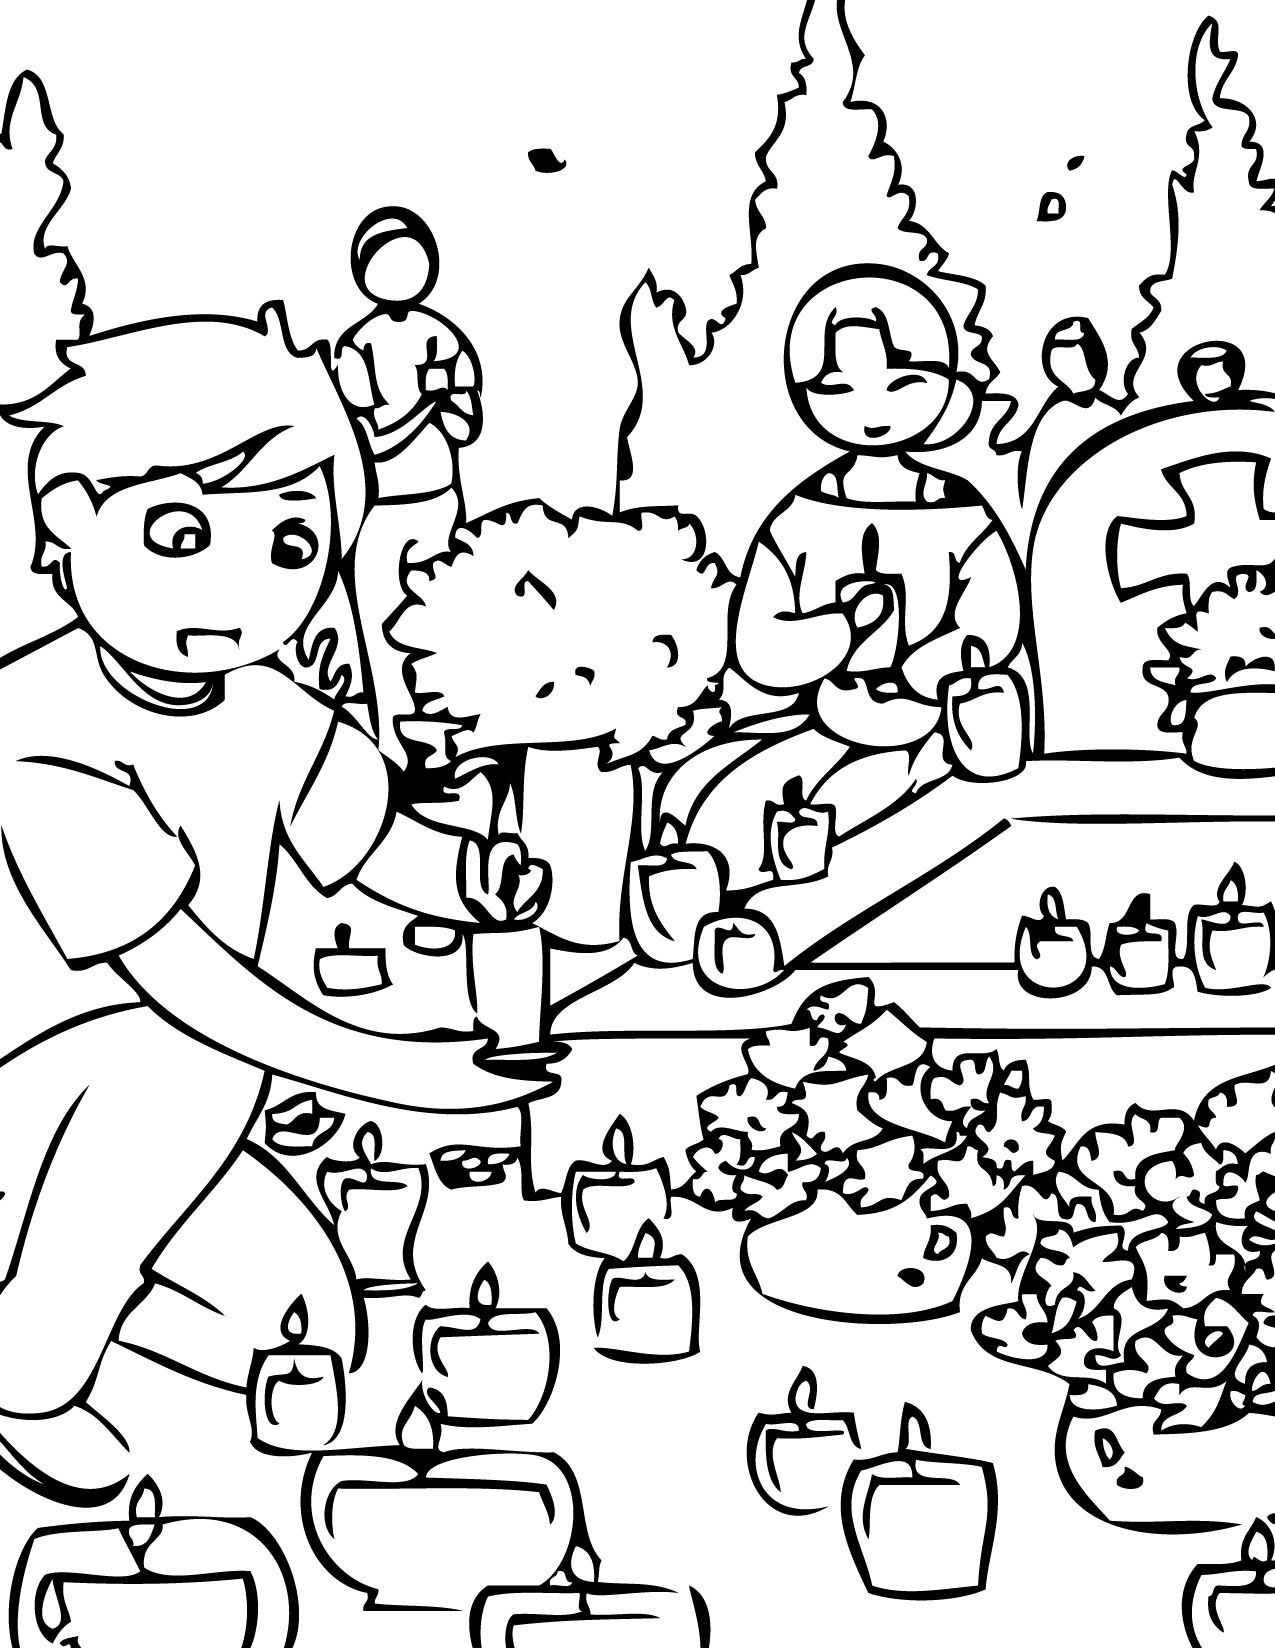 All Saints Day Coloring Pages Coloring Home